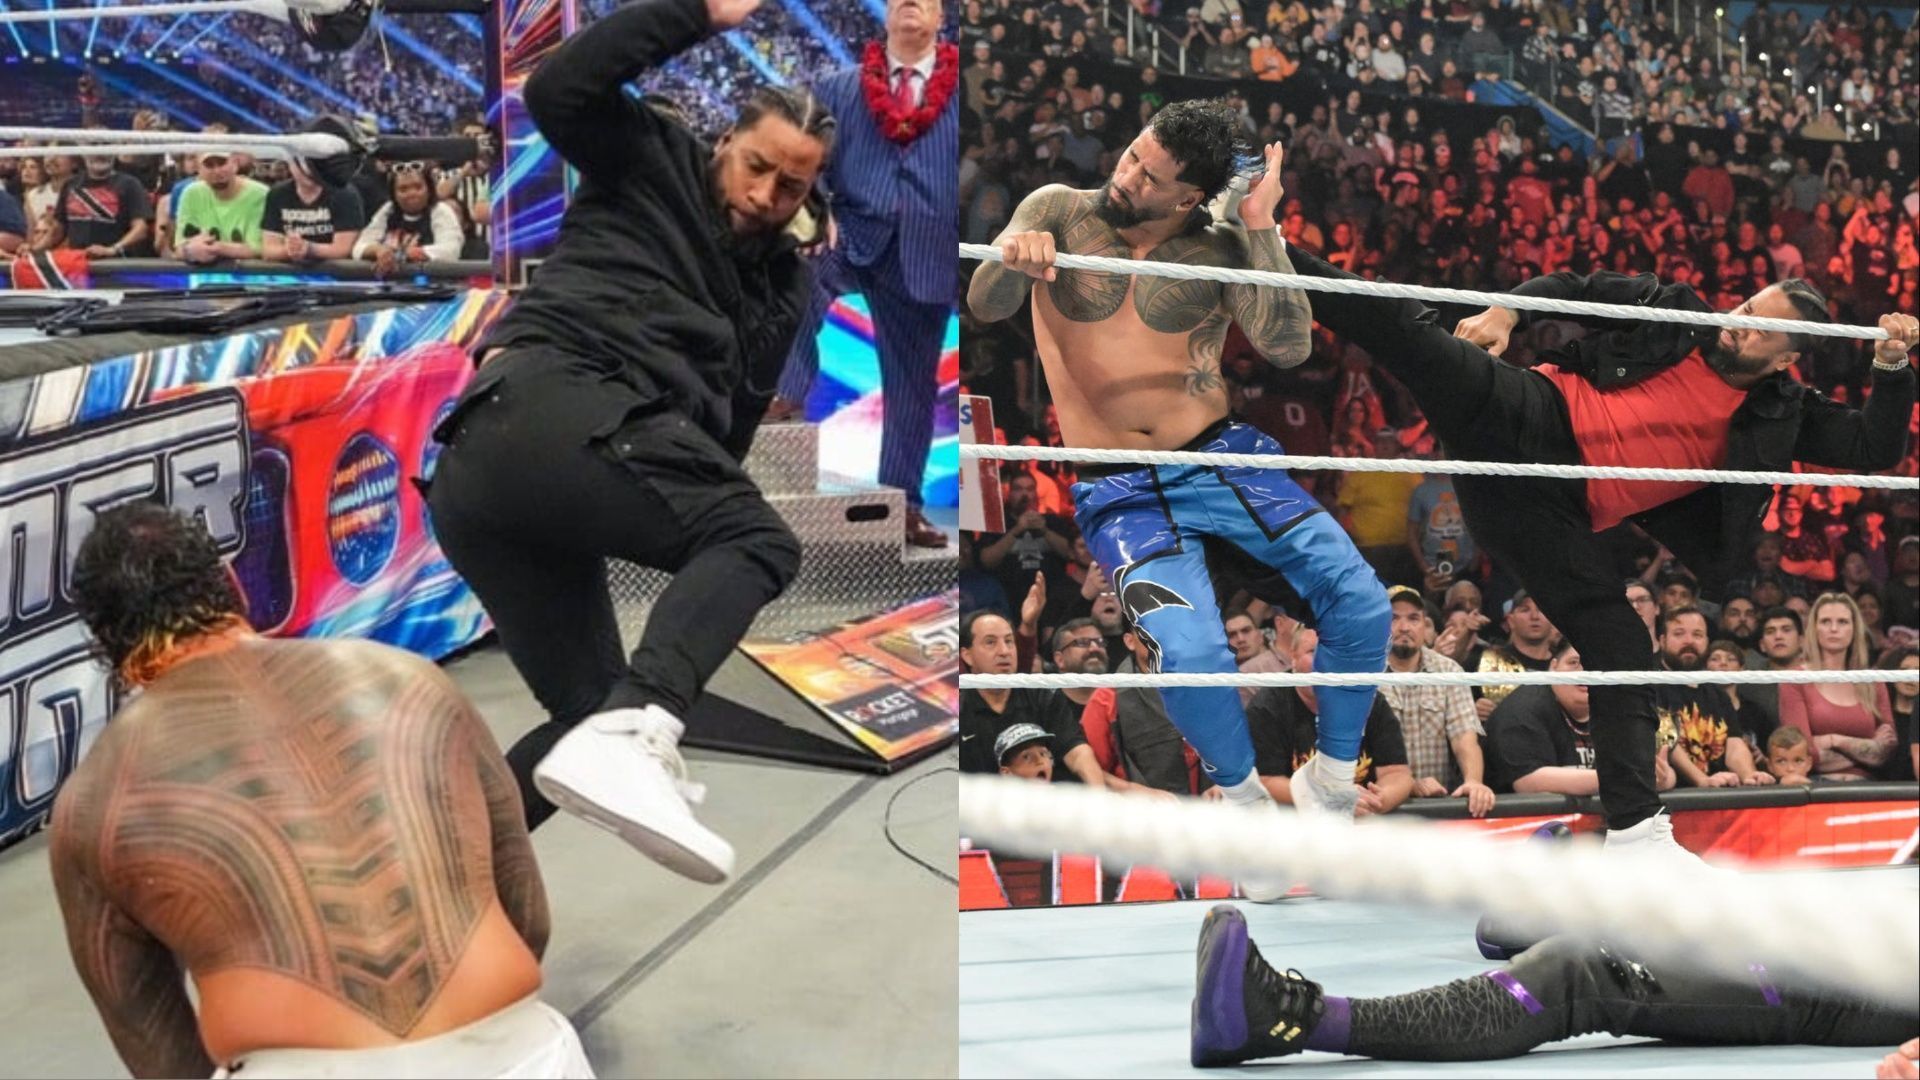 Jimmy Uso has cost Jey several high-profile matches.